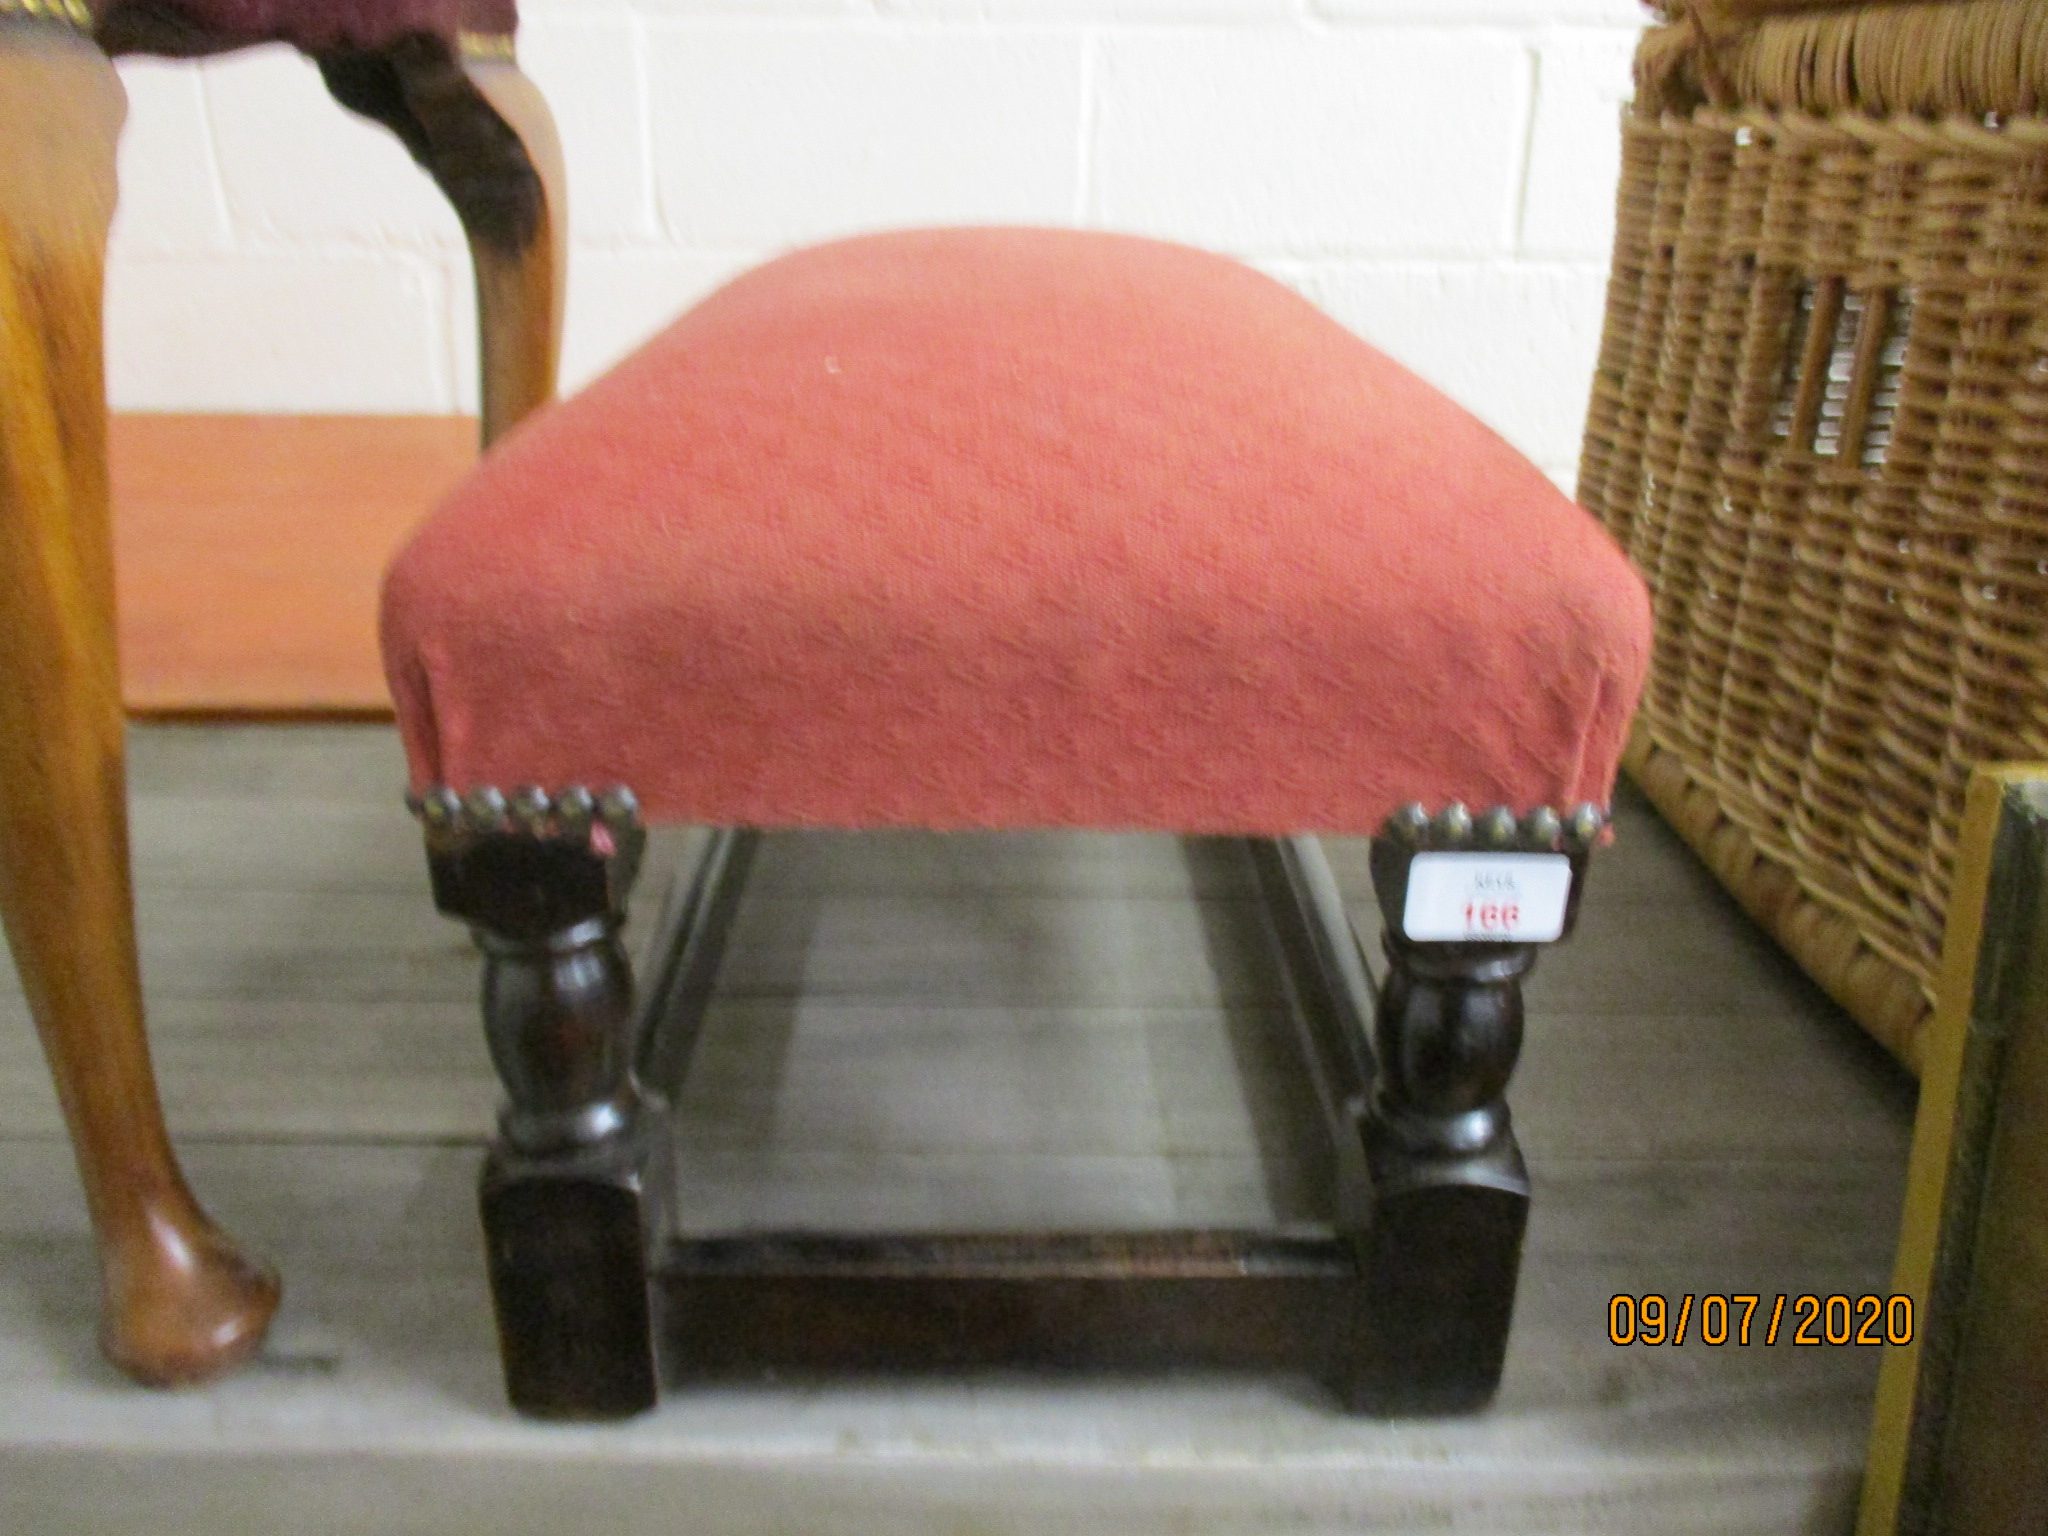 OAK FOOT STOOL WITH PINK SEAT